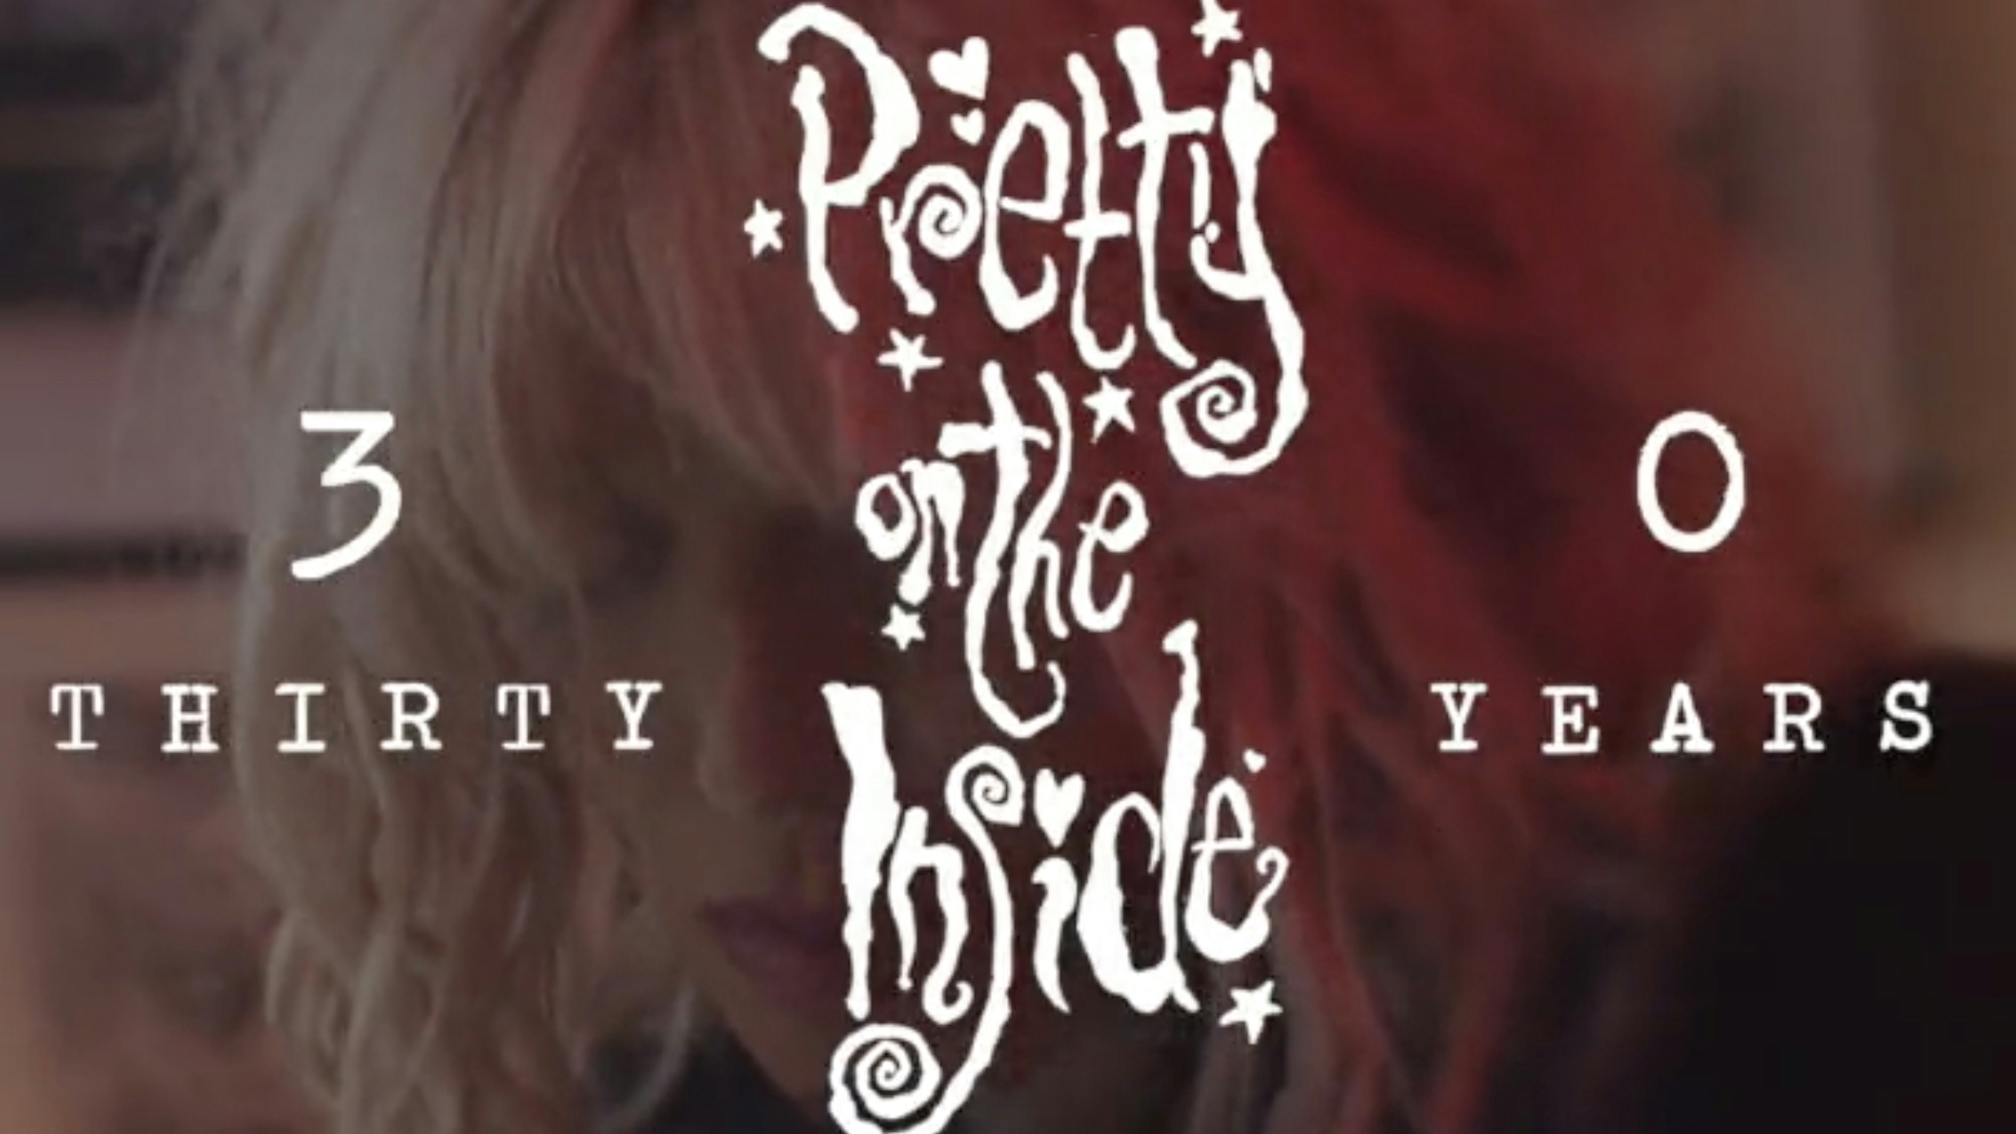 Courtney Love to celebrate Pretty On The Inside 30th anniversary with charity art exhibition